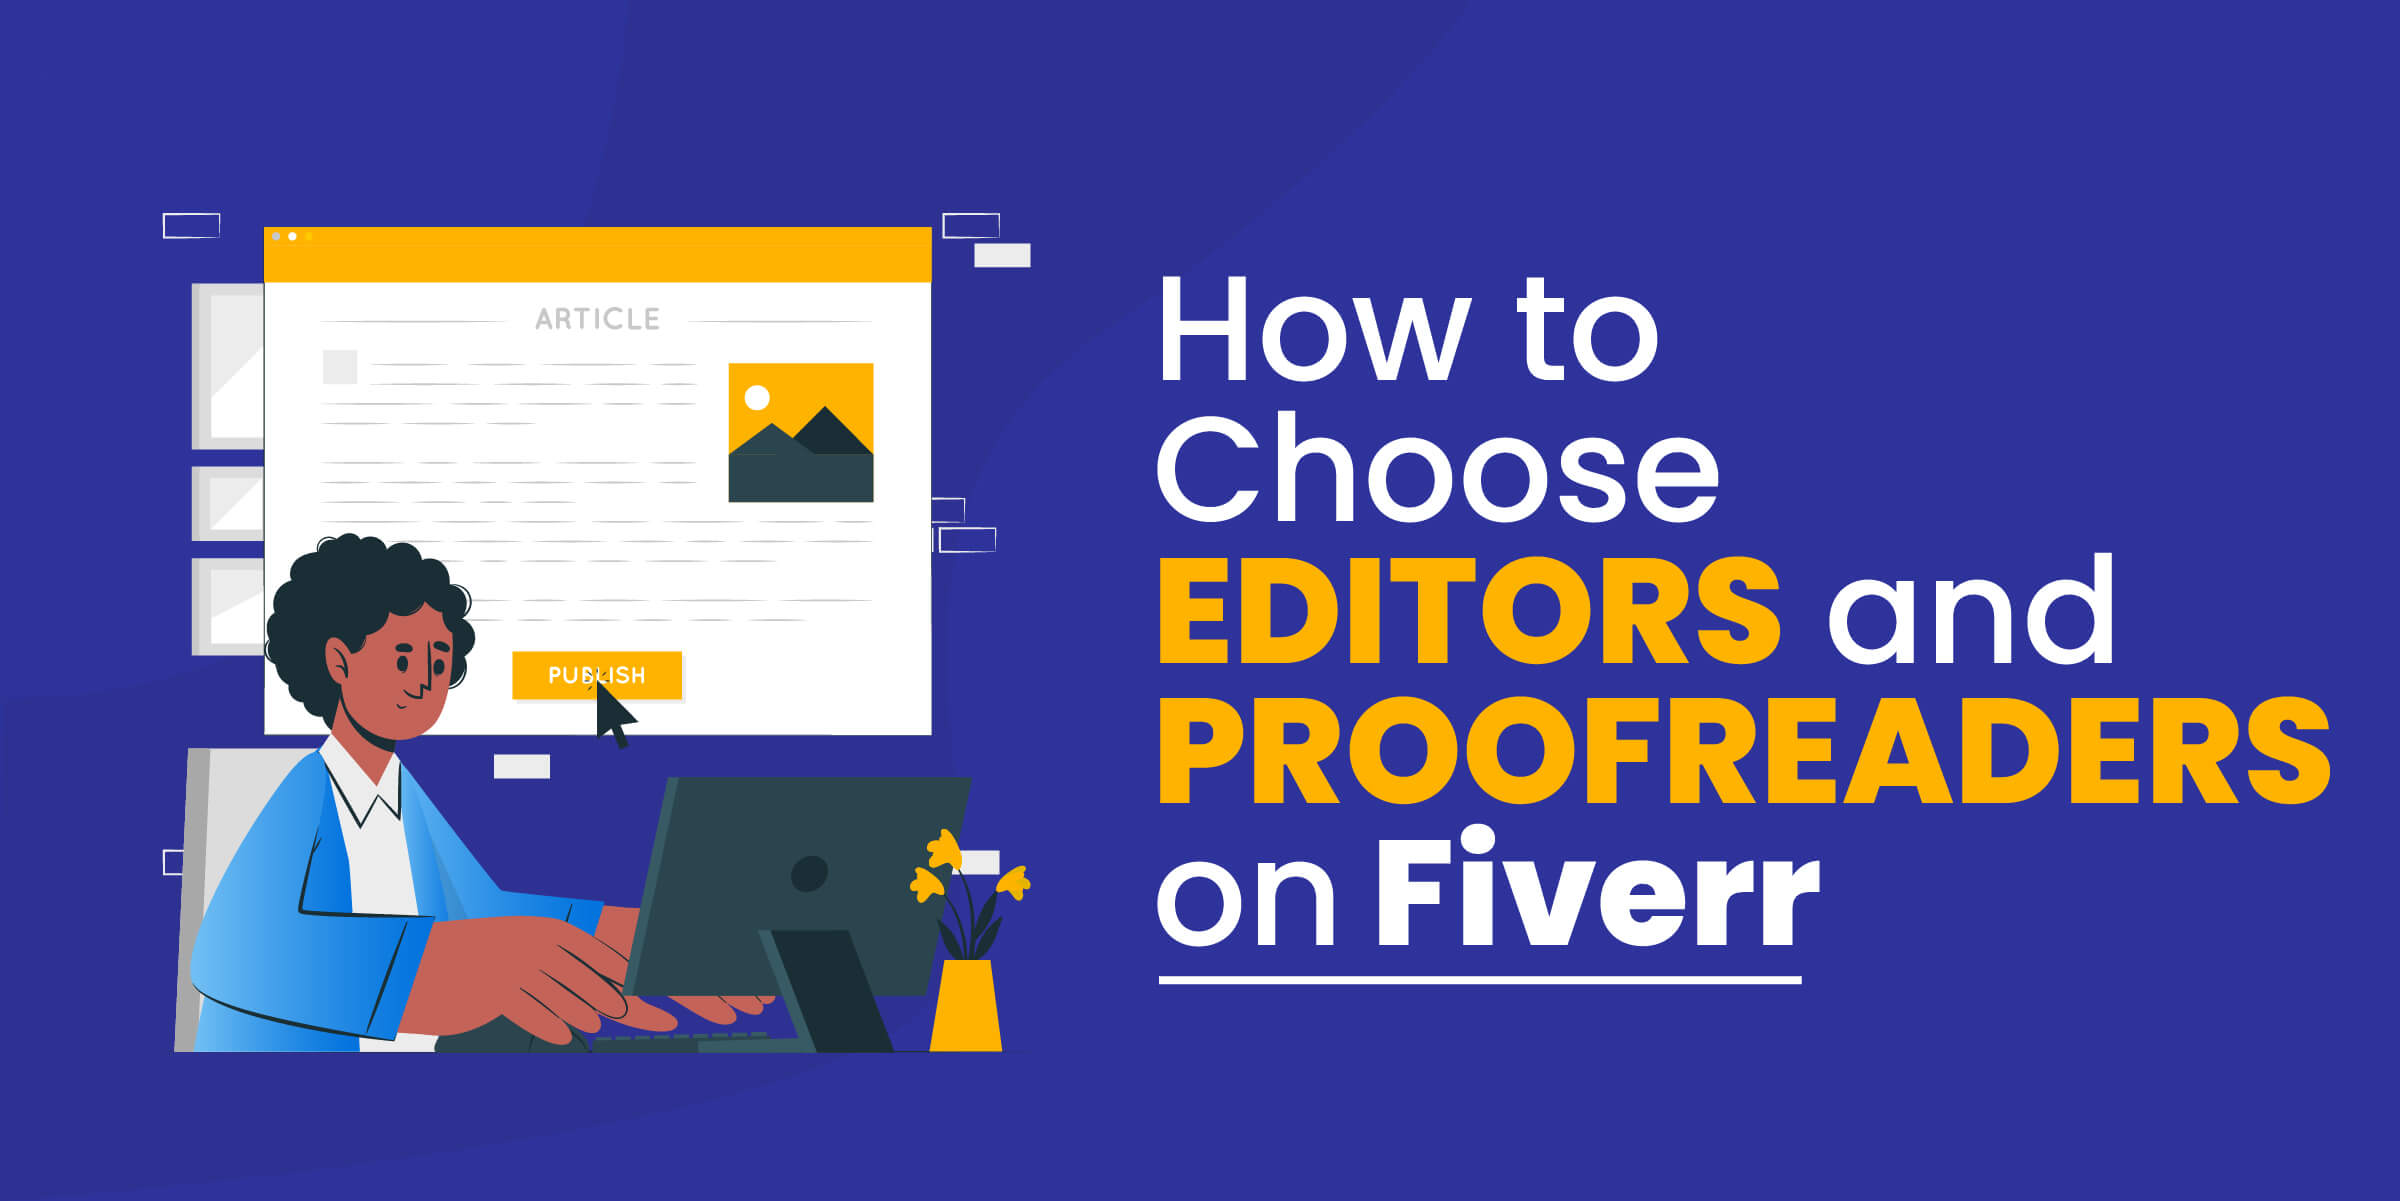 How to Choose Editors and Proofreaders on Fiverr